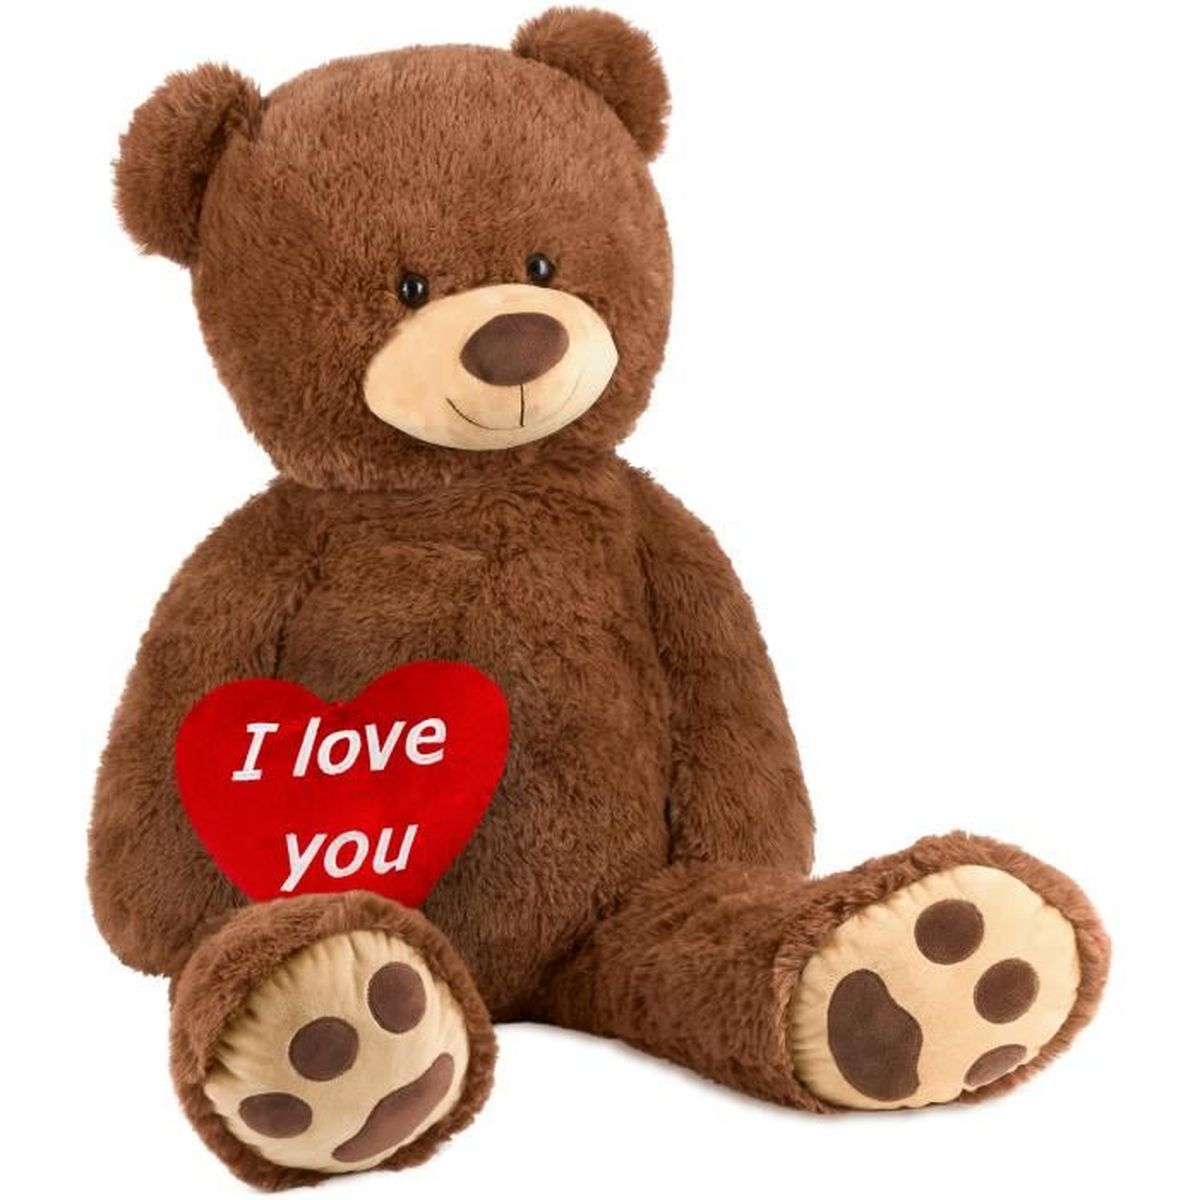 10" Peluche-Holding Love-Cadeau-Neuf Me To You Ours 